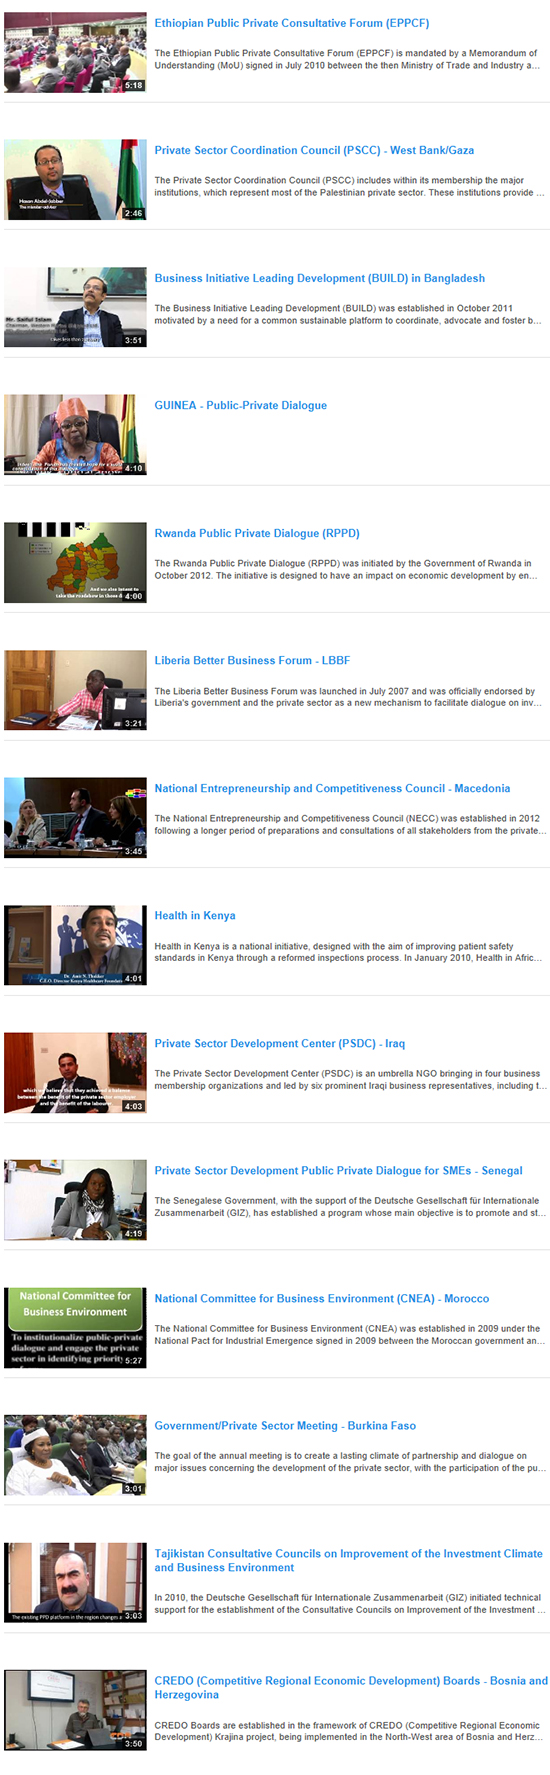 Click to see the PPD Videos from the 7th PPD Workshop delegations